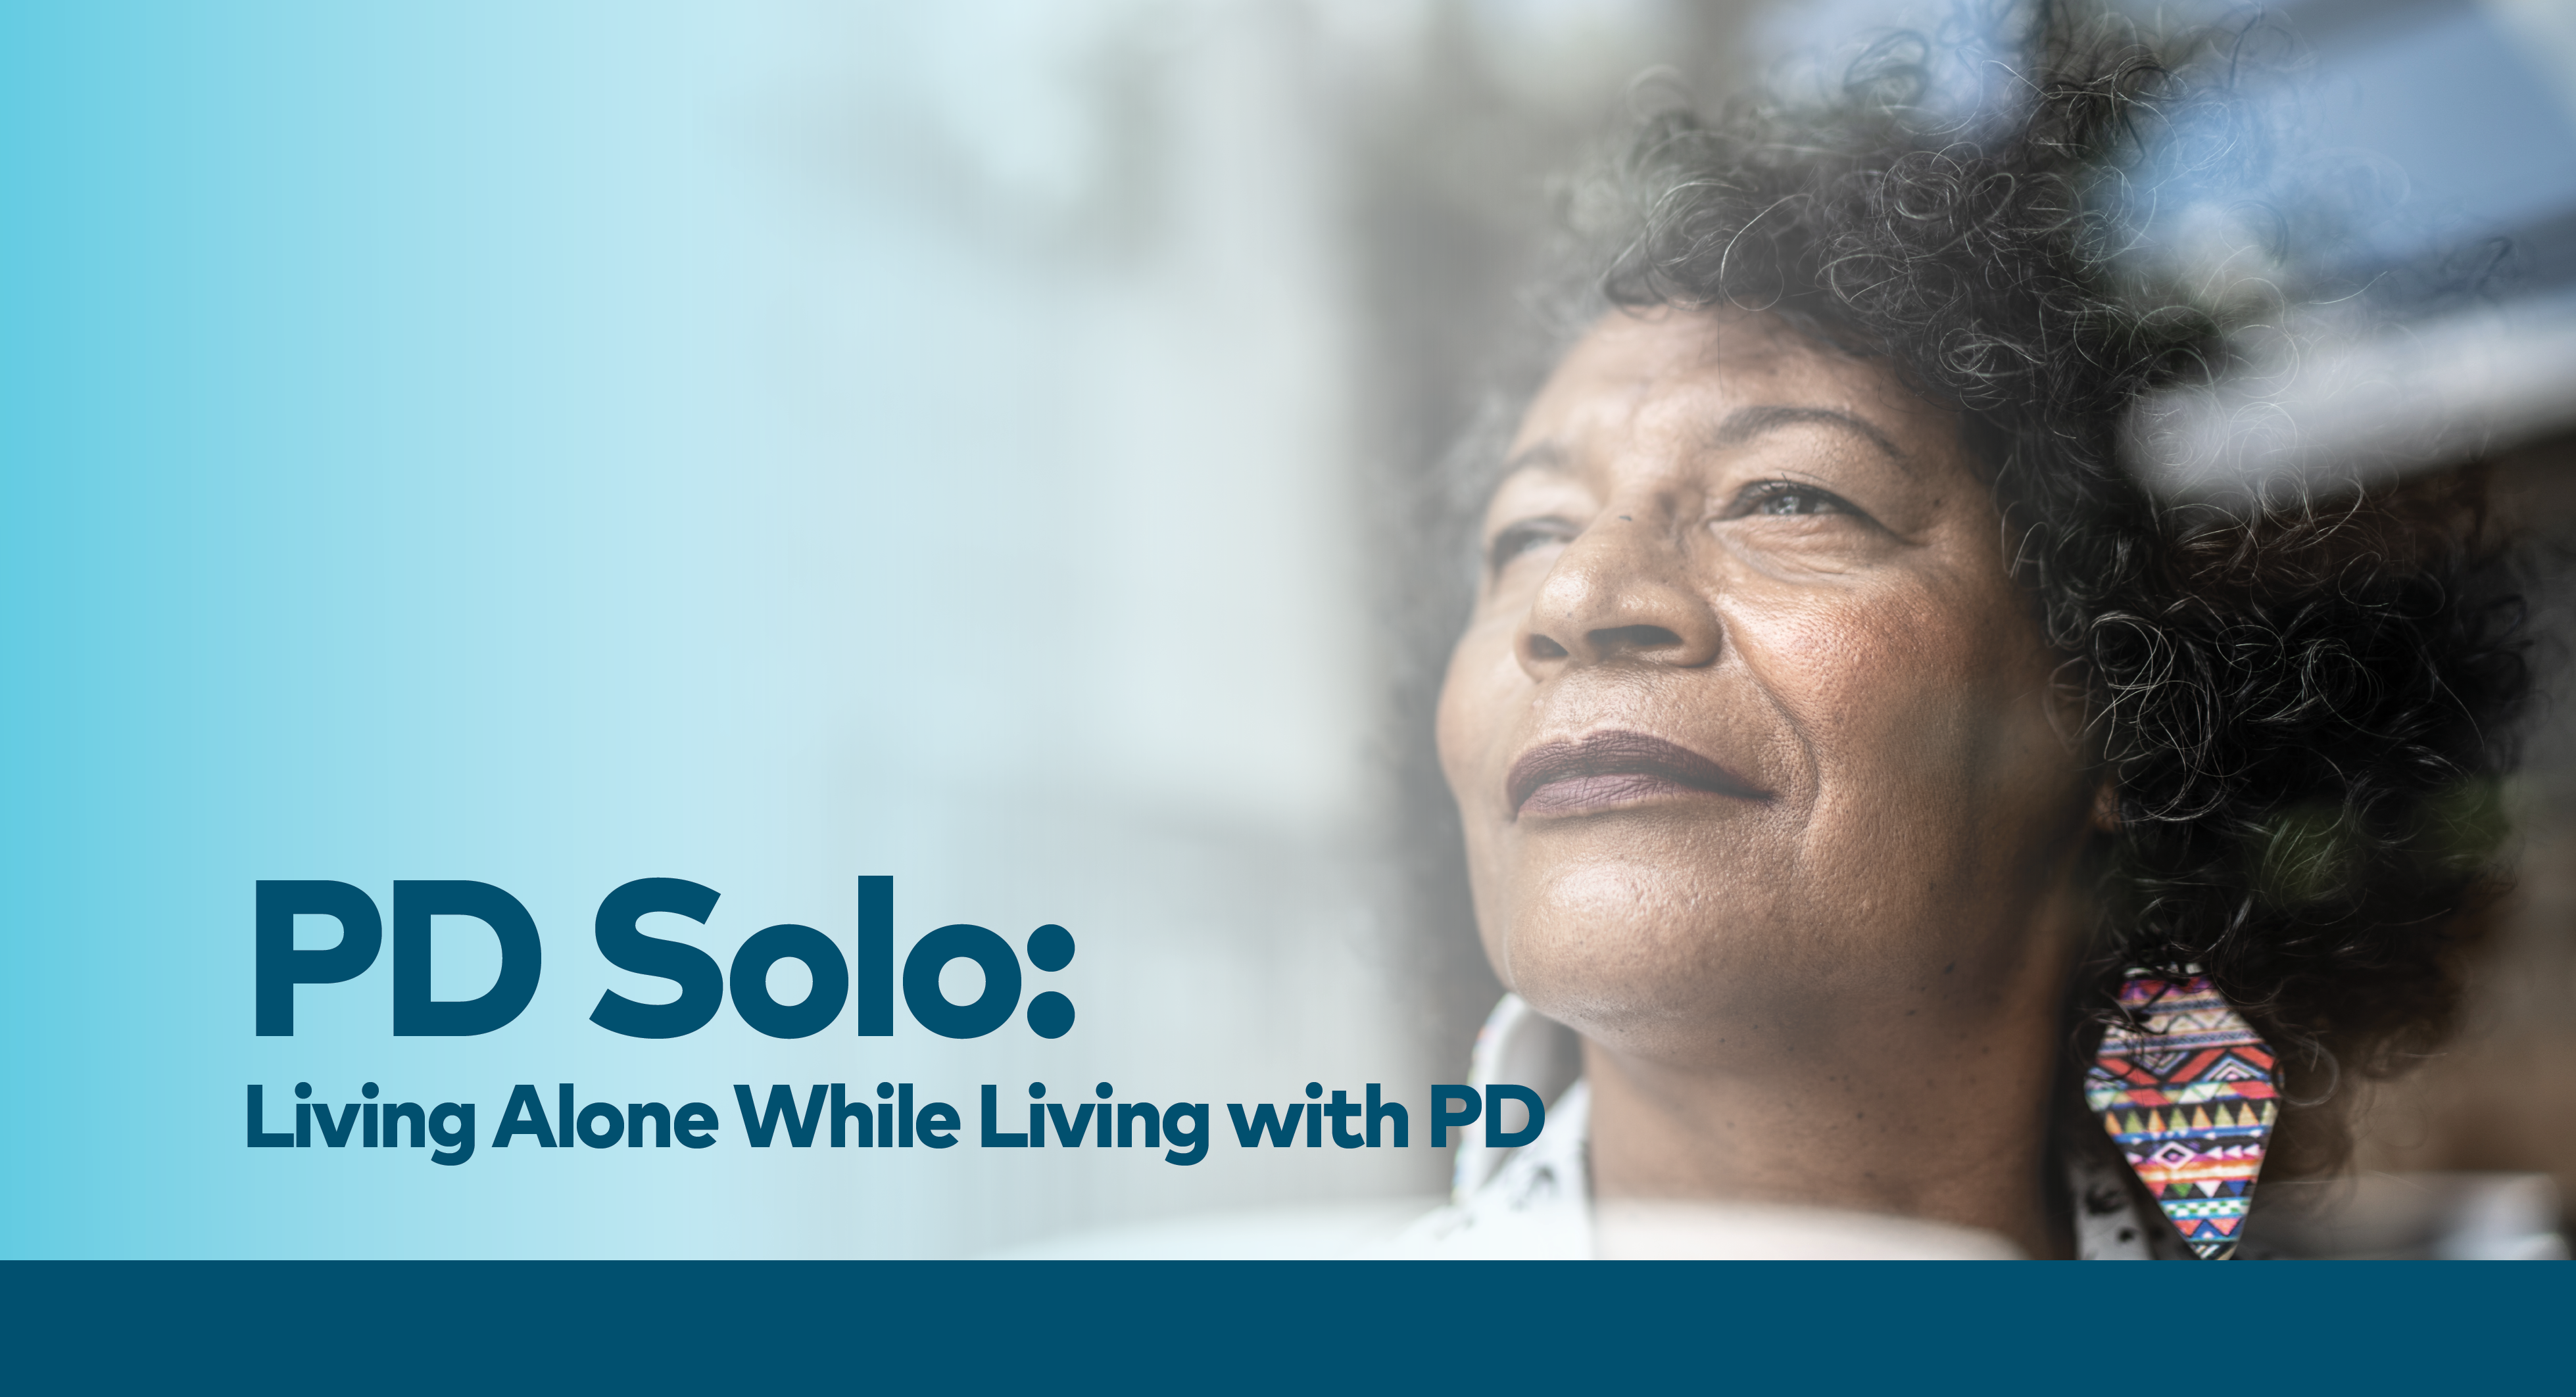 PD Solo event banner of woman staring out the window